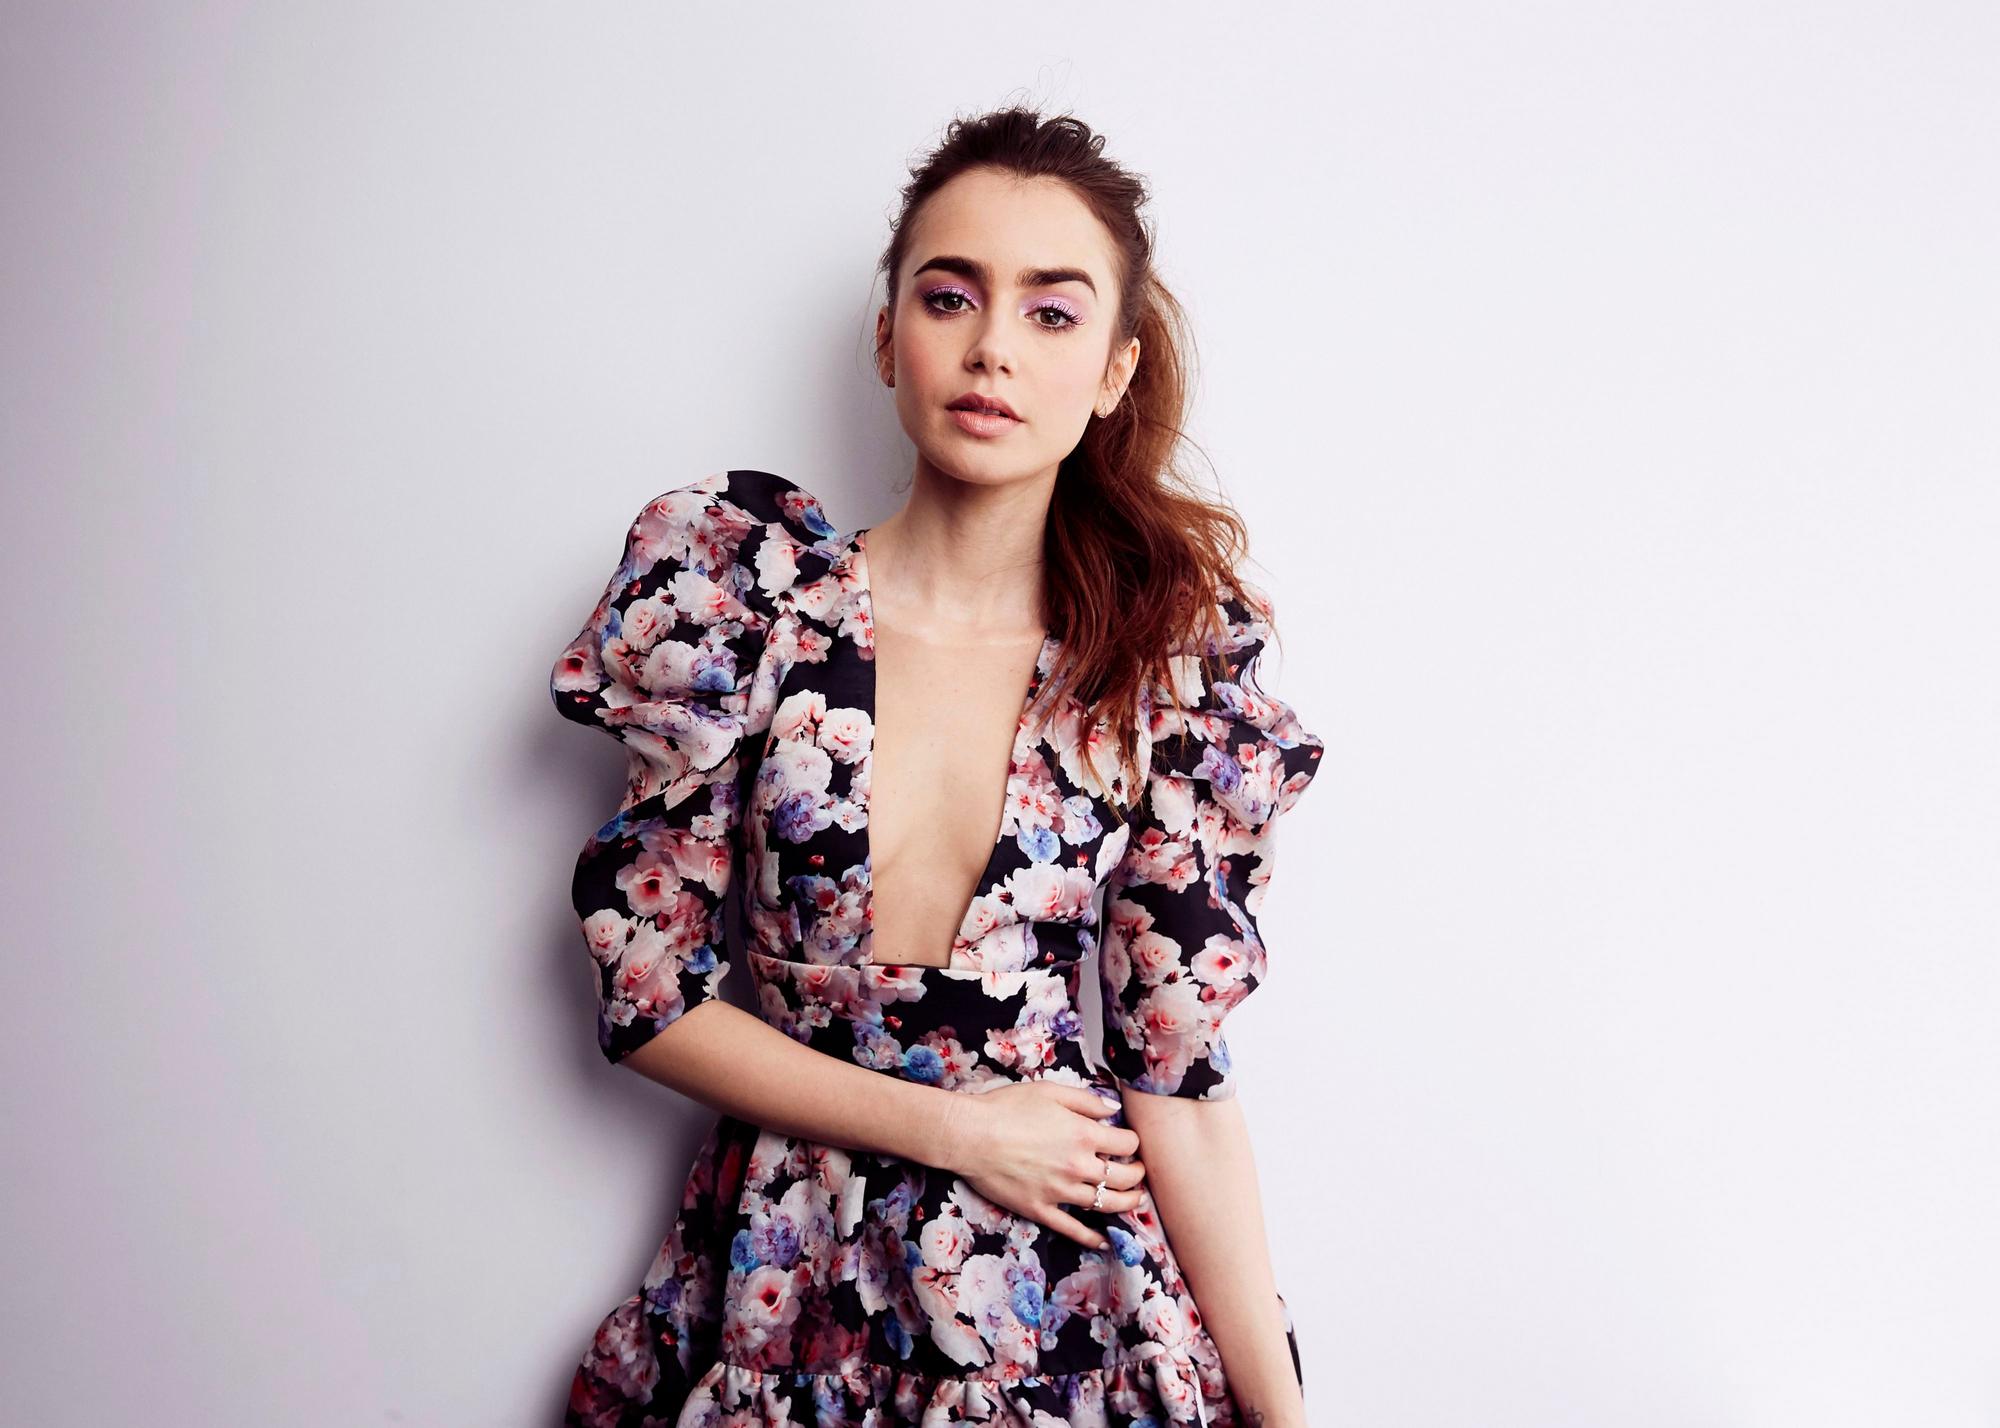 Wallpapers Lily Collins celebrities girls on the desktop